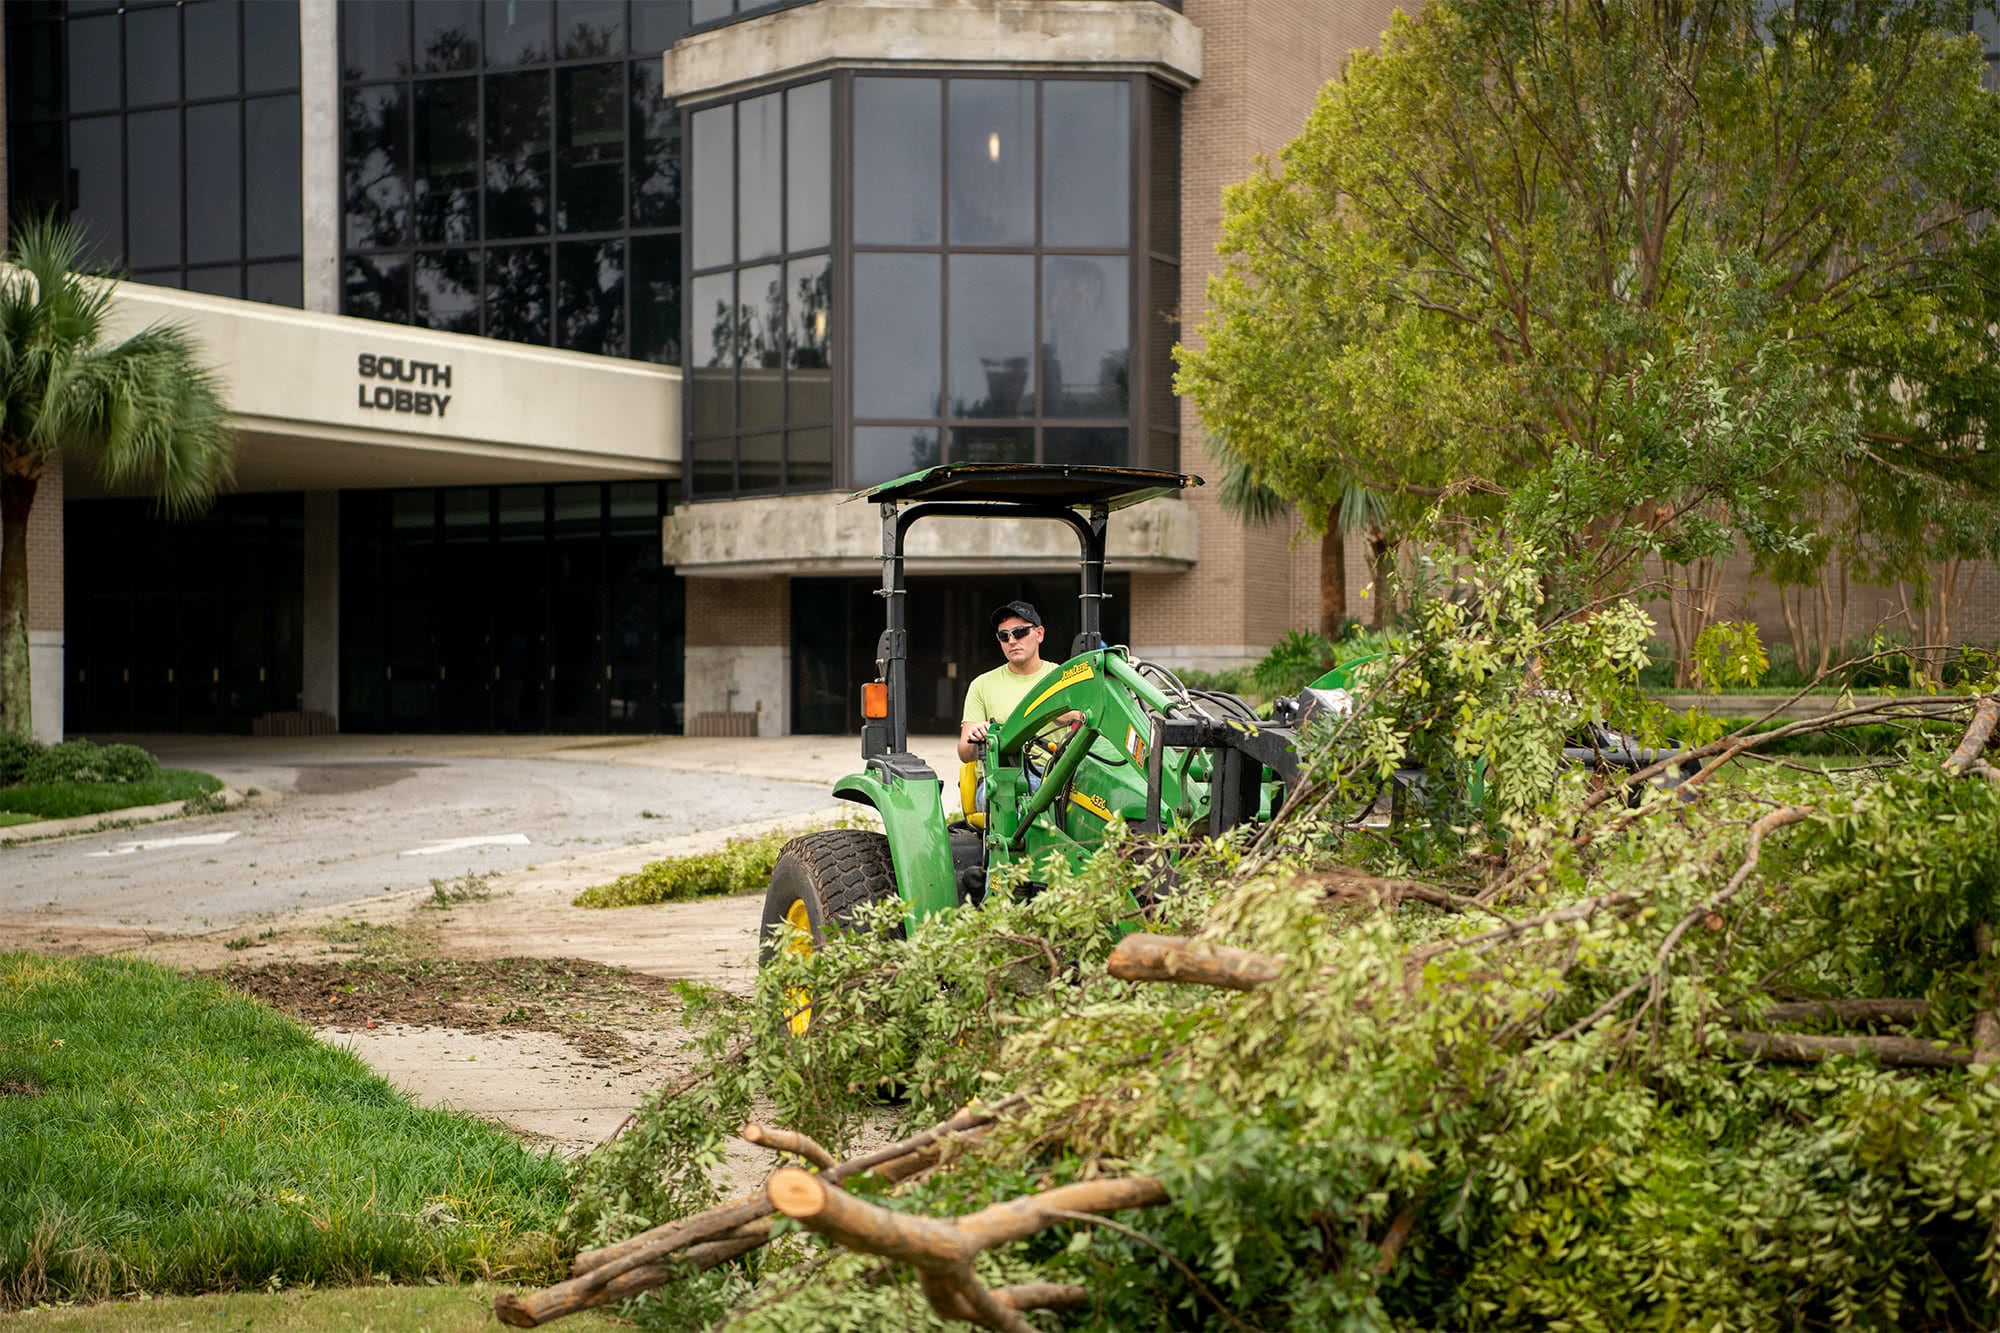 Grounds workers use tractors to move debris